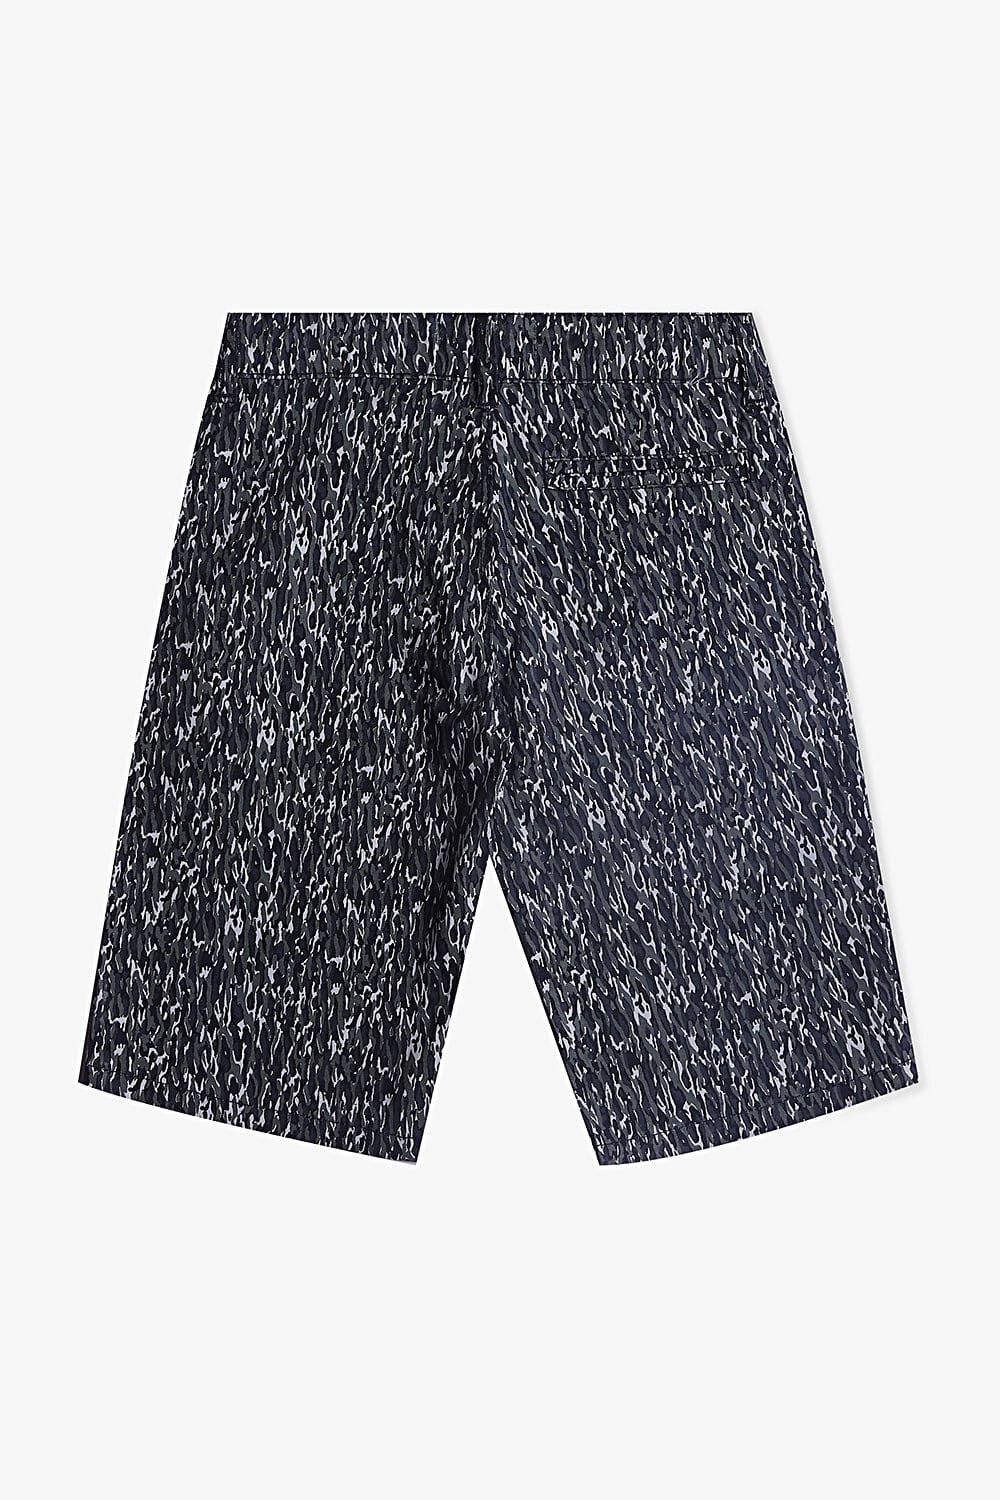 Hope Not Out by Shahid Afridi Boys Non Denim Shorts Cotton Printed Three Quarter Shorts